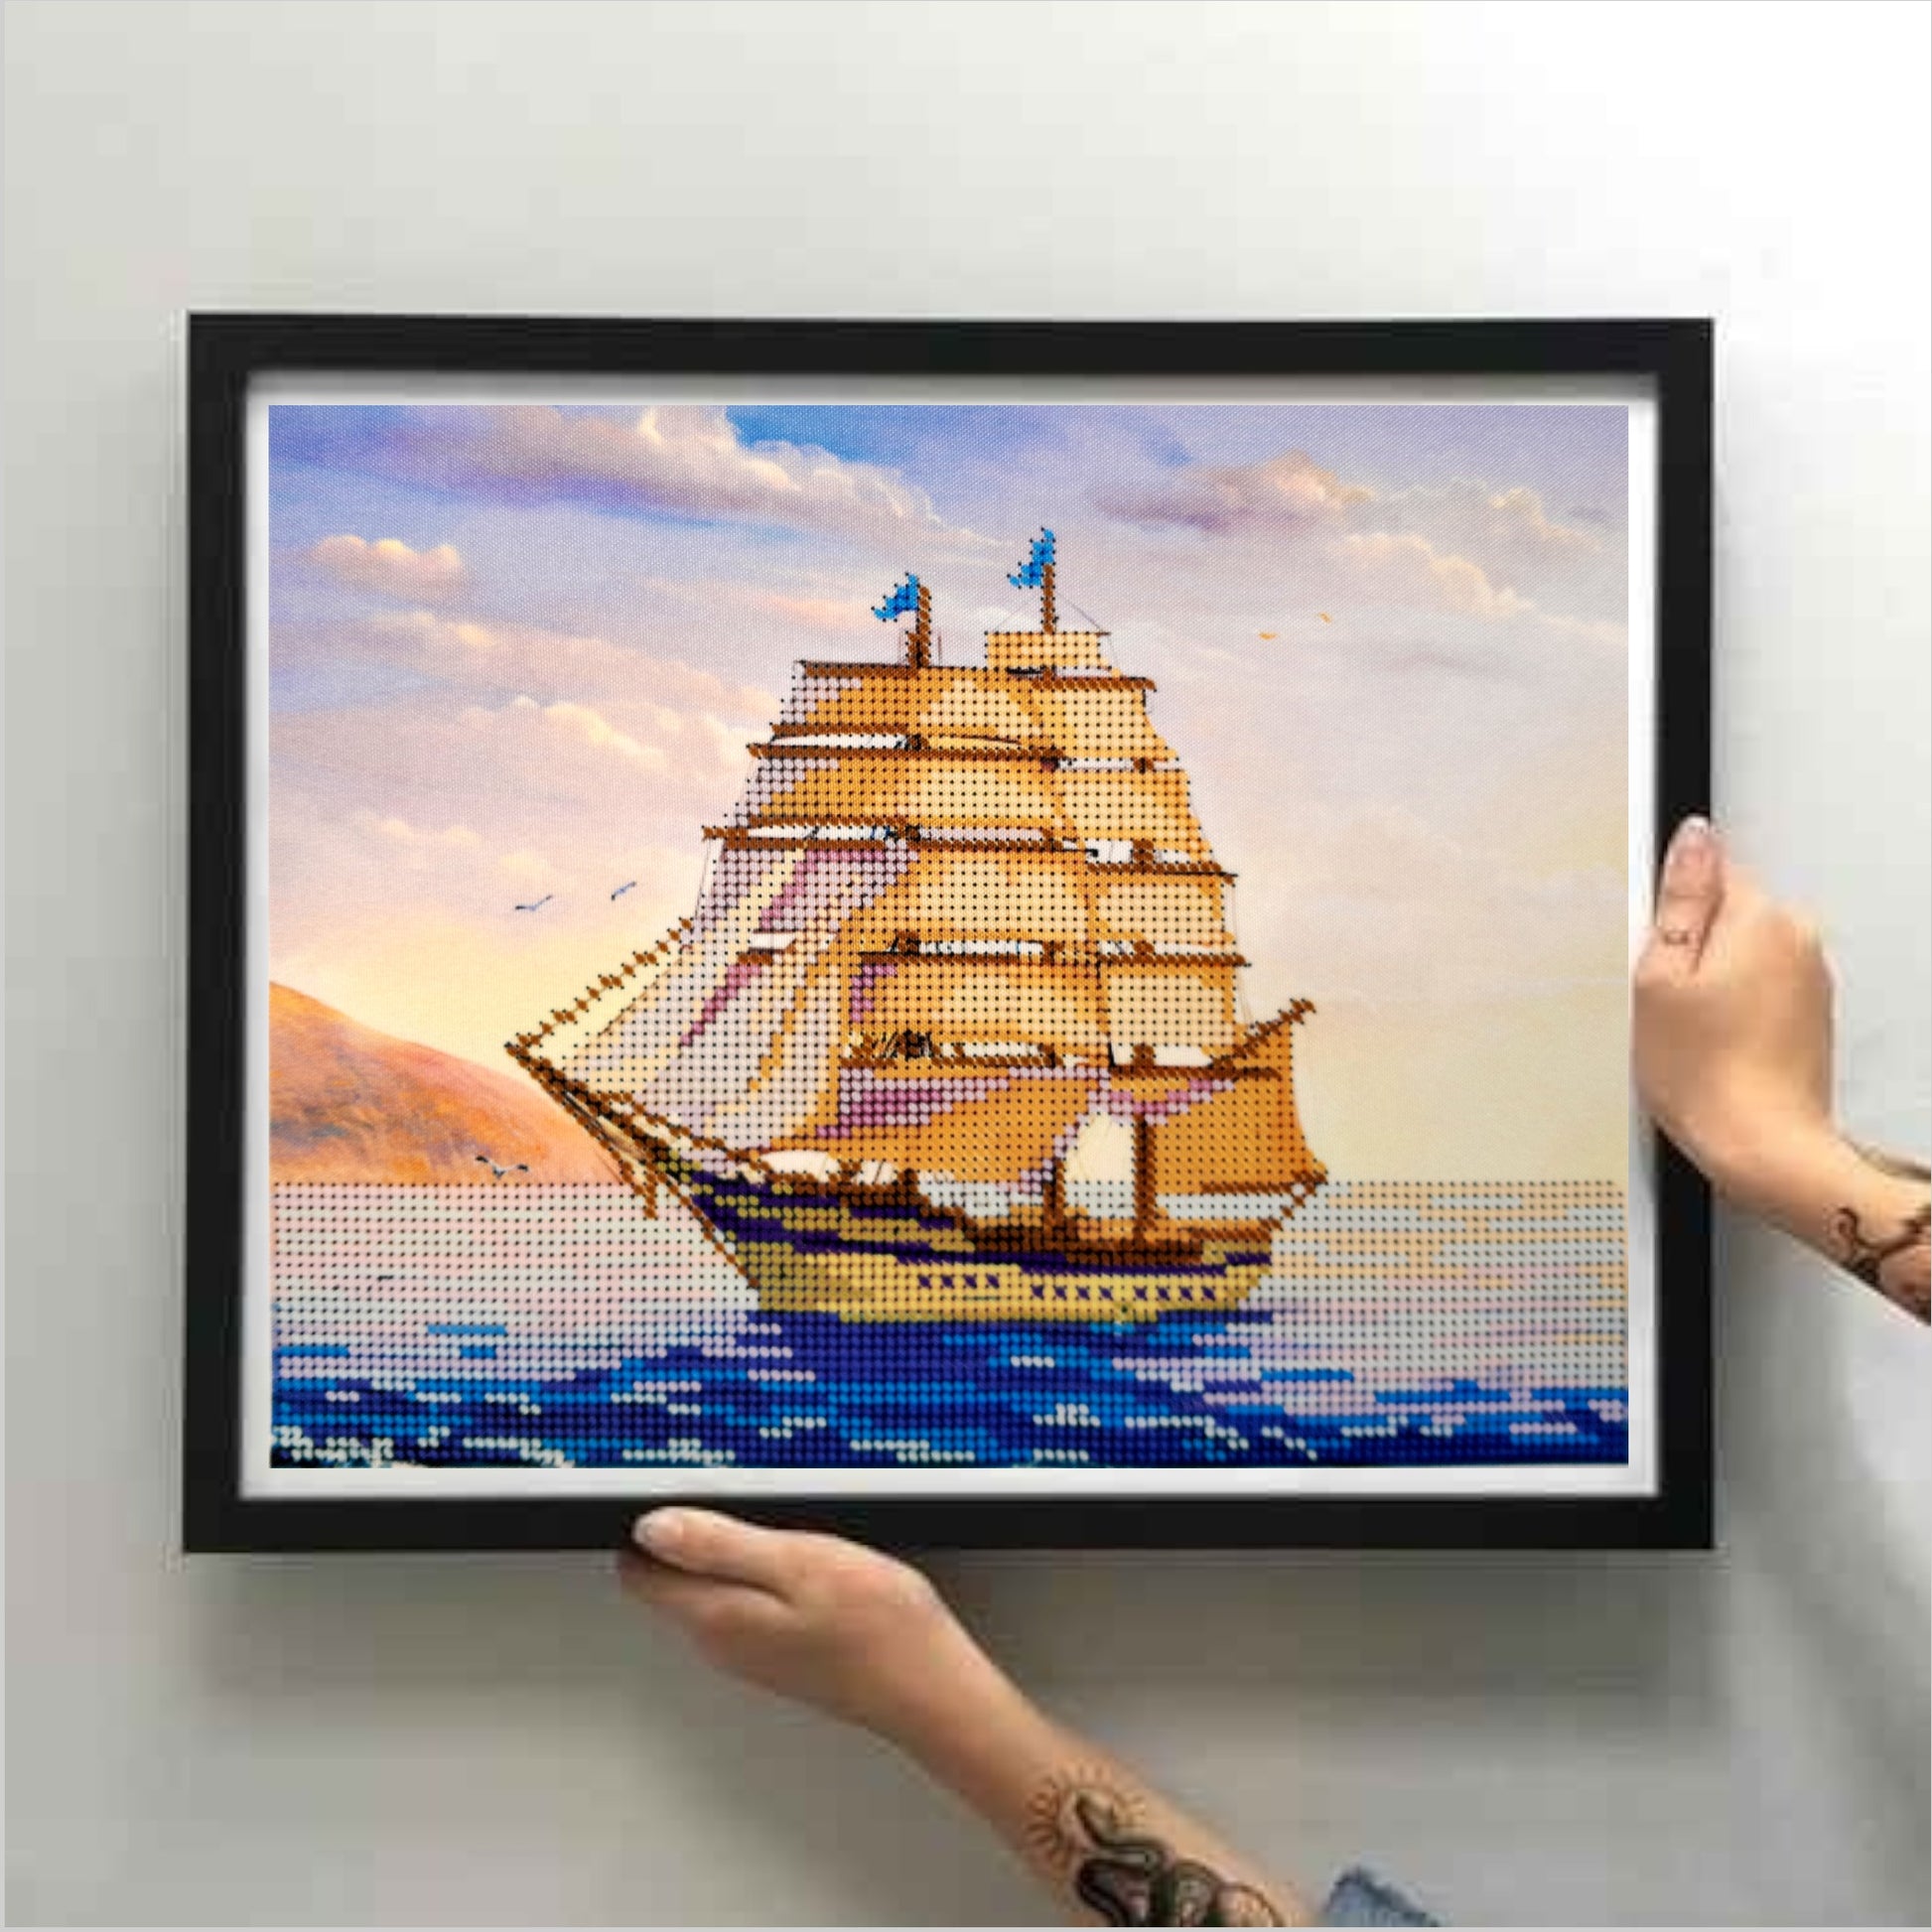 DIY Bead embroidery kit "Sailboat". size: 9.8 - 7.9in (25.9 - 20.3cm). - VadymShop